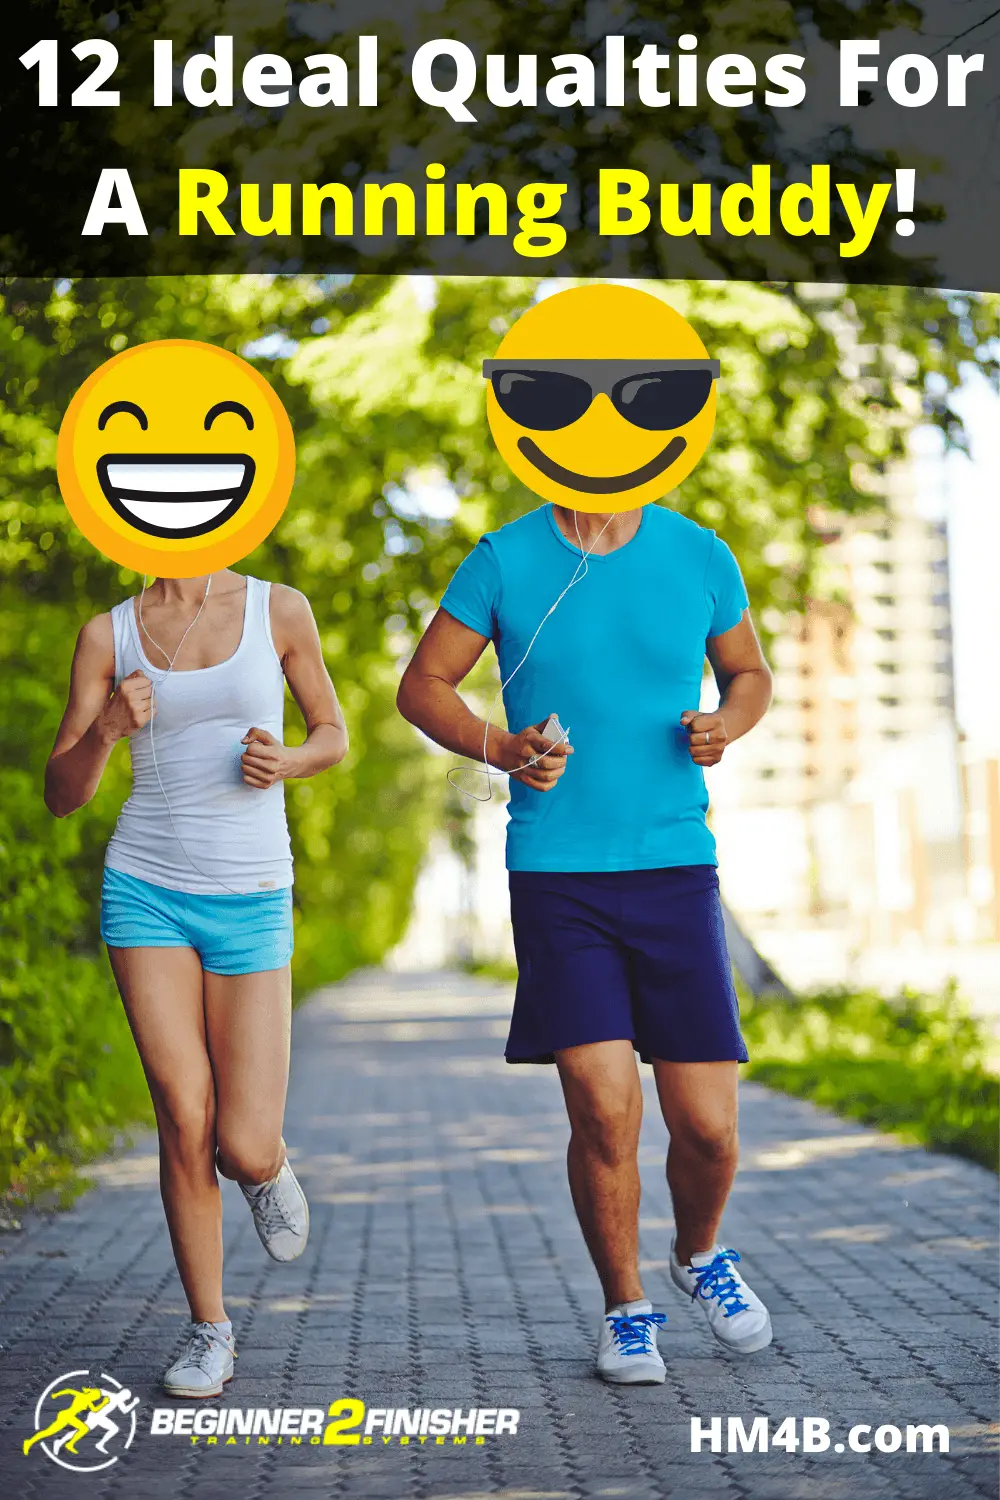 12 Ideal Qualities To Look For In A Running Buddy/Partner